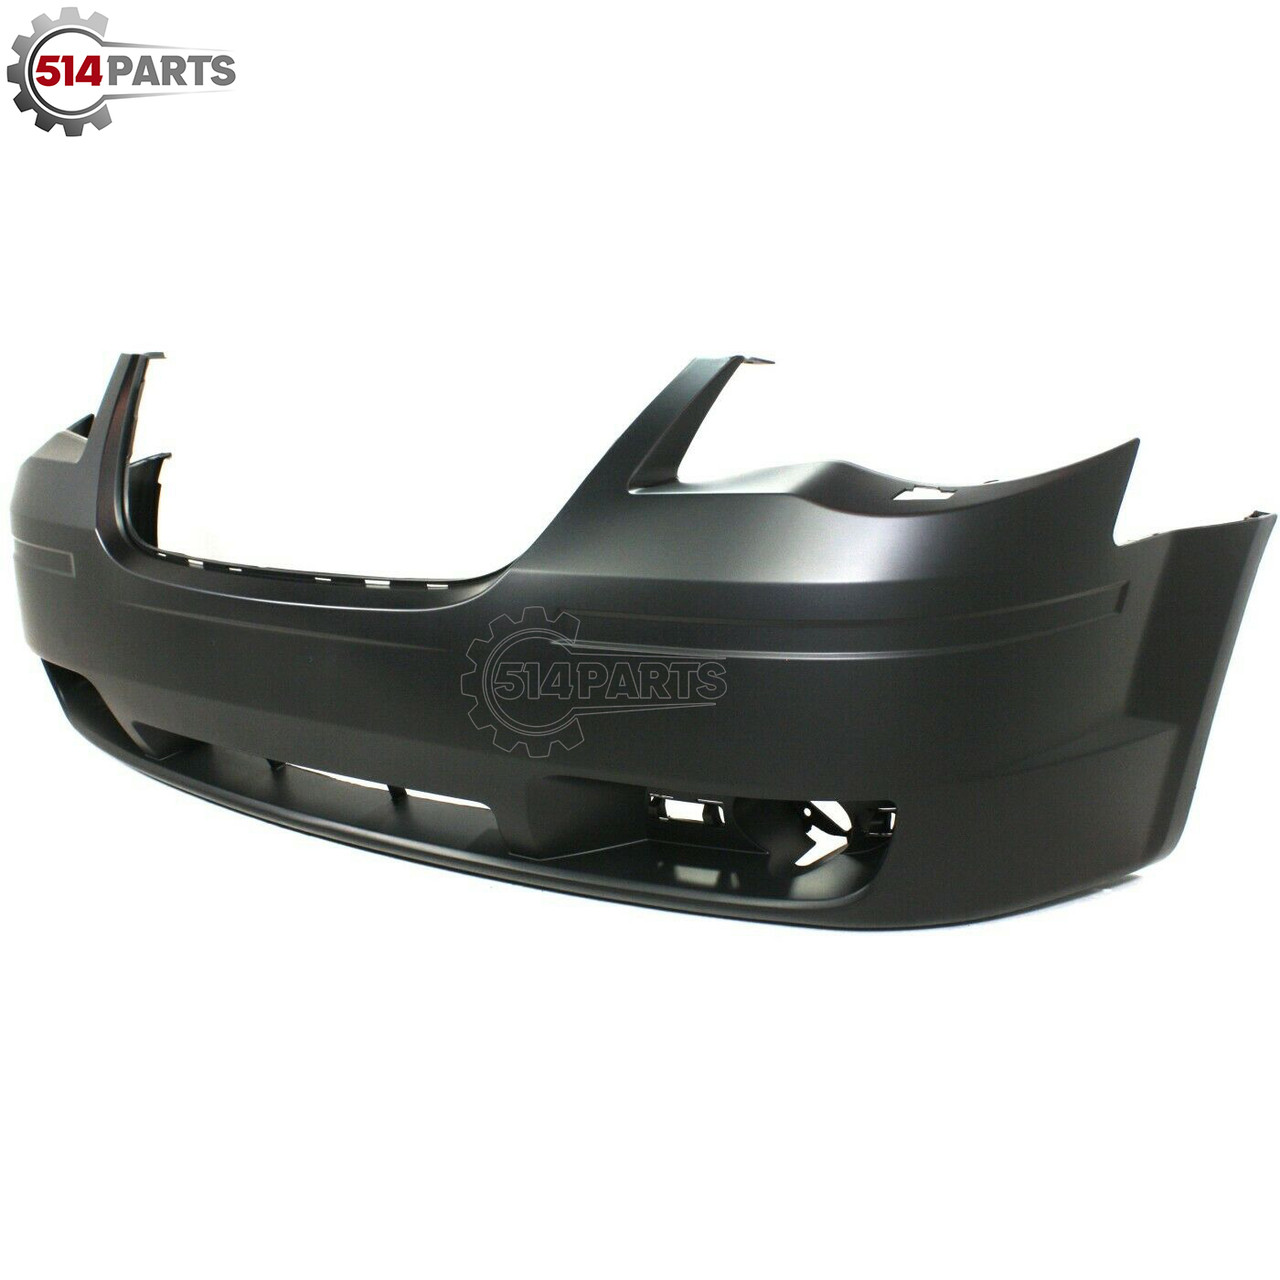 2008 - 2010 CHRYSLER TOWN and COUNTRY FRONT BUMPER COVER with HEADLIGHT WASHER without MOULDING HOLES - PARE-CHOCS AVANT avec LAVE-PHARE sans TROUS DE MOULAGE